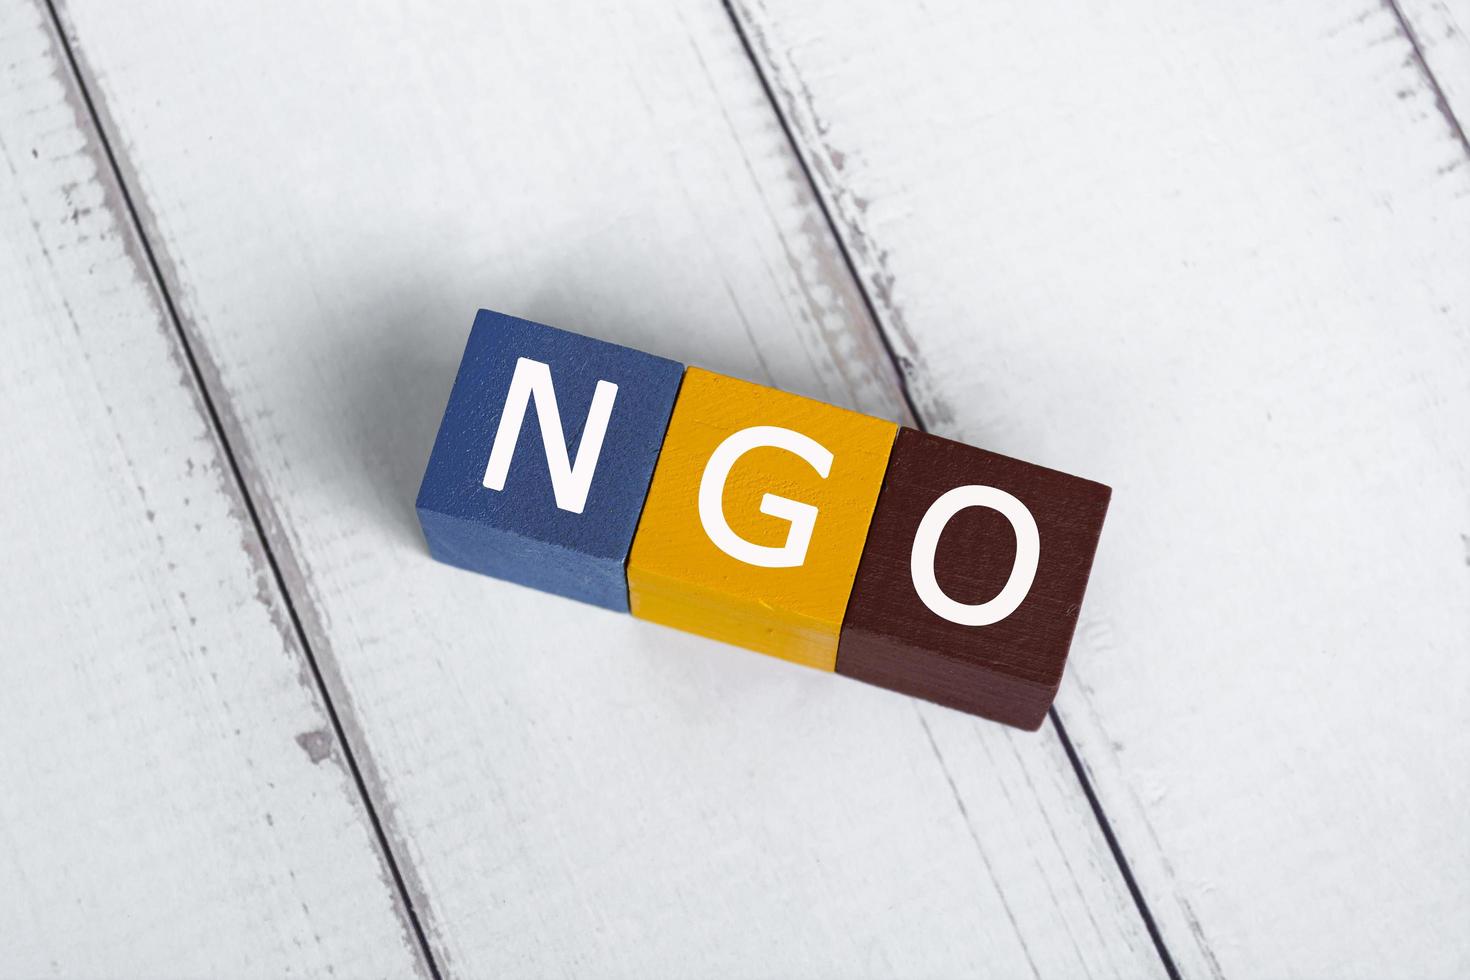 NGO acronym for Non-Governmental Organization on colorful wooden cube. photo